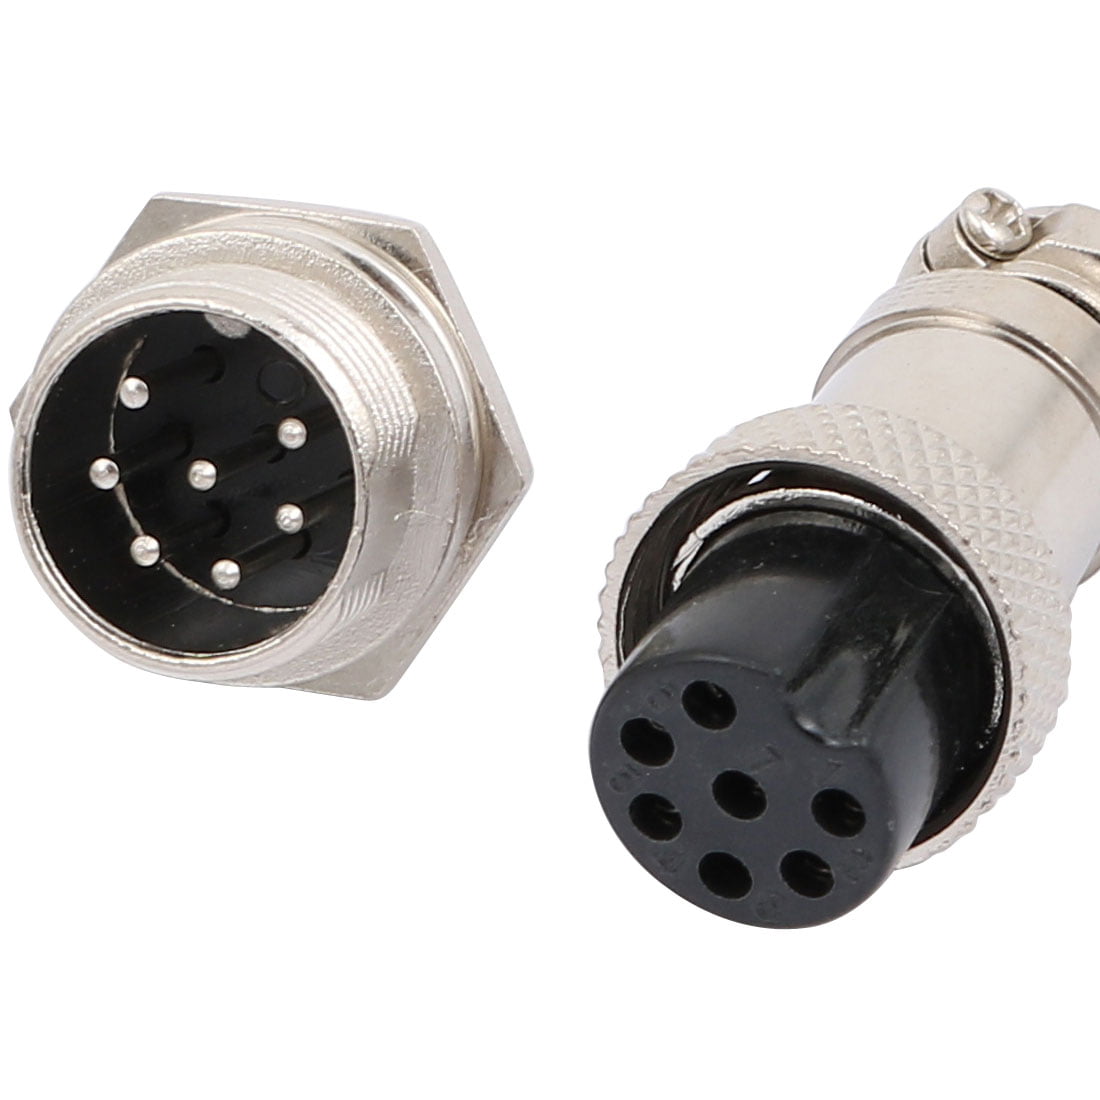 2pcs connector Aviation plug 16mm 5Pin male and female for Panel Classis Metal 